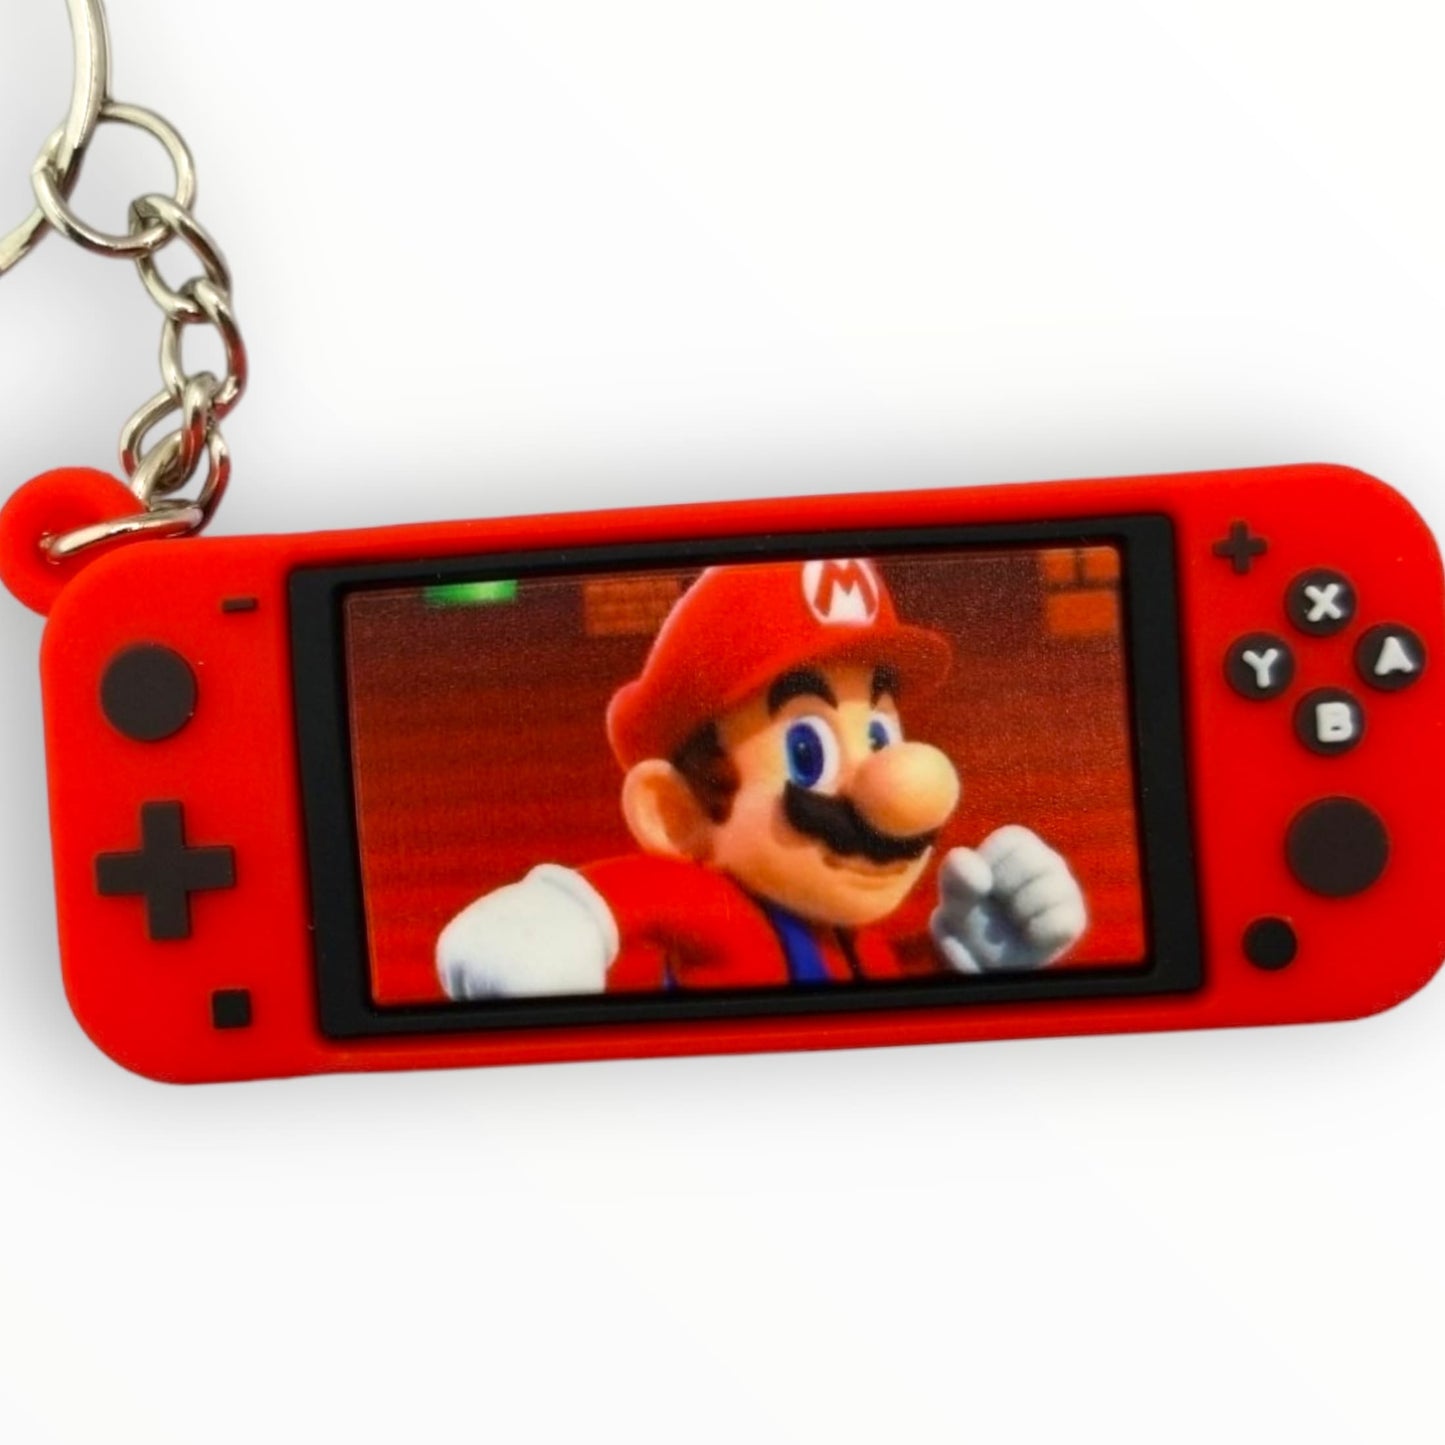 Nintendo Switch Super Mario Controller Replica Keychain from Confetti Kitty, Only 9.99